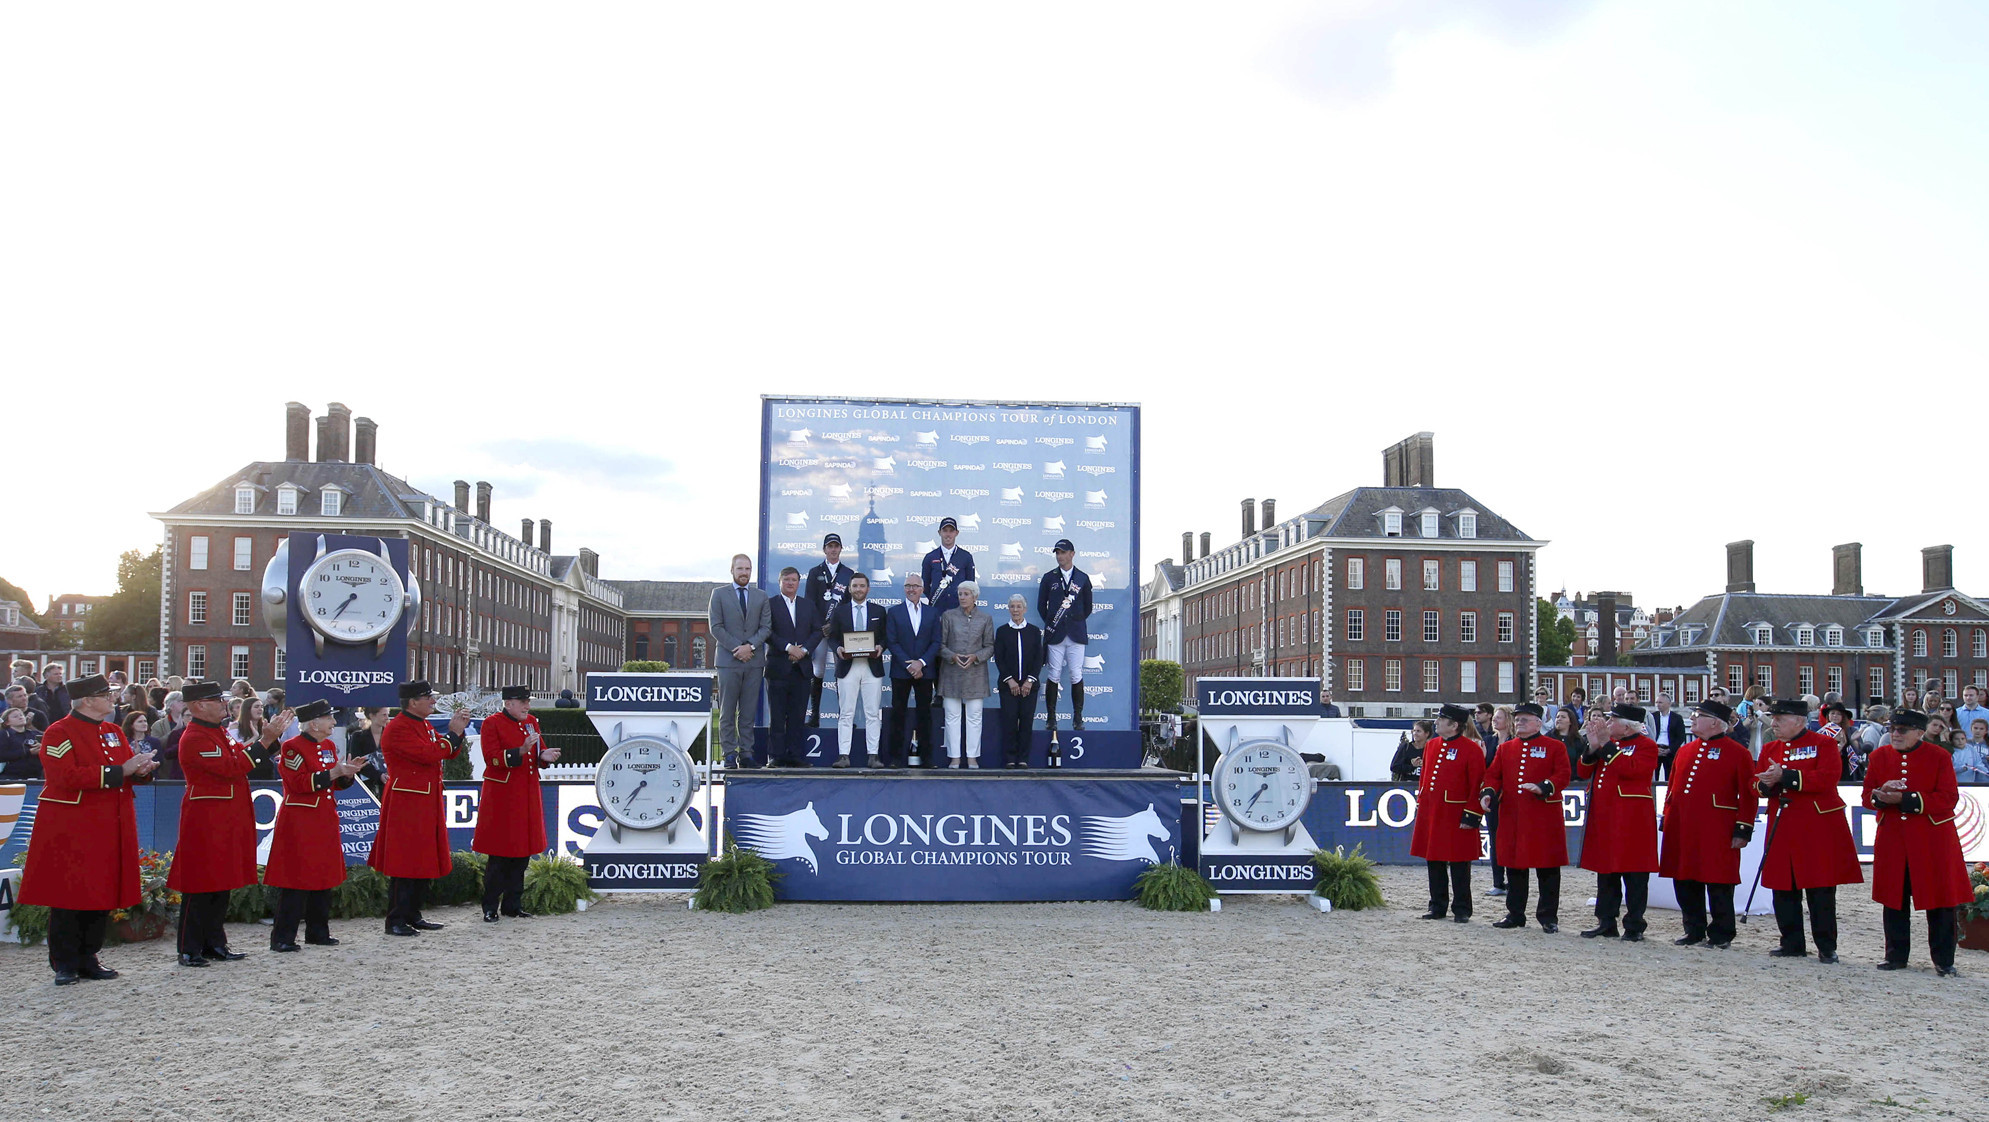 The Global Champions Tour returns to Royal Hospital Chelsea in London, with Britain's Ben Maher leading overall ©LGCT